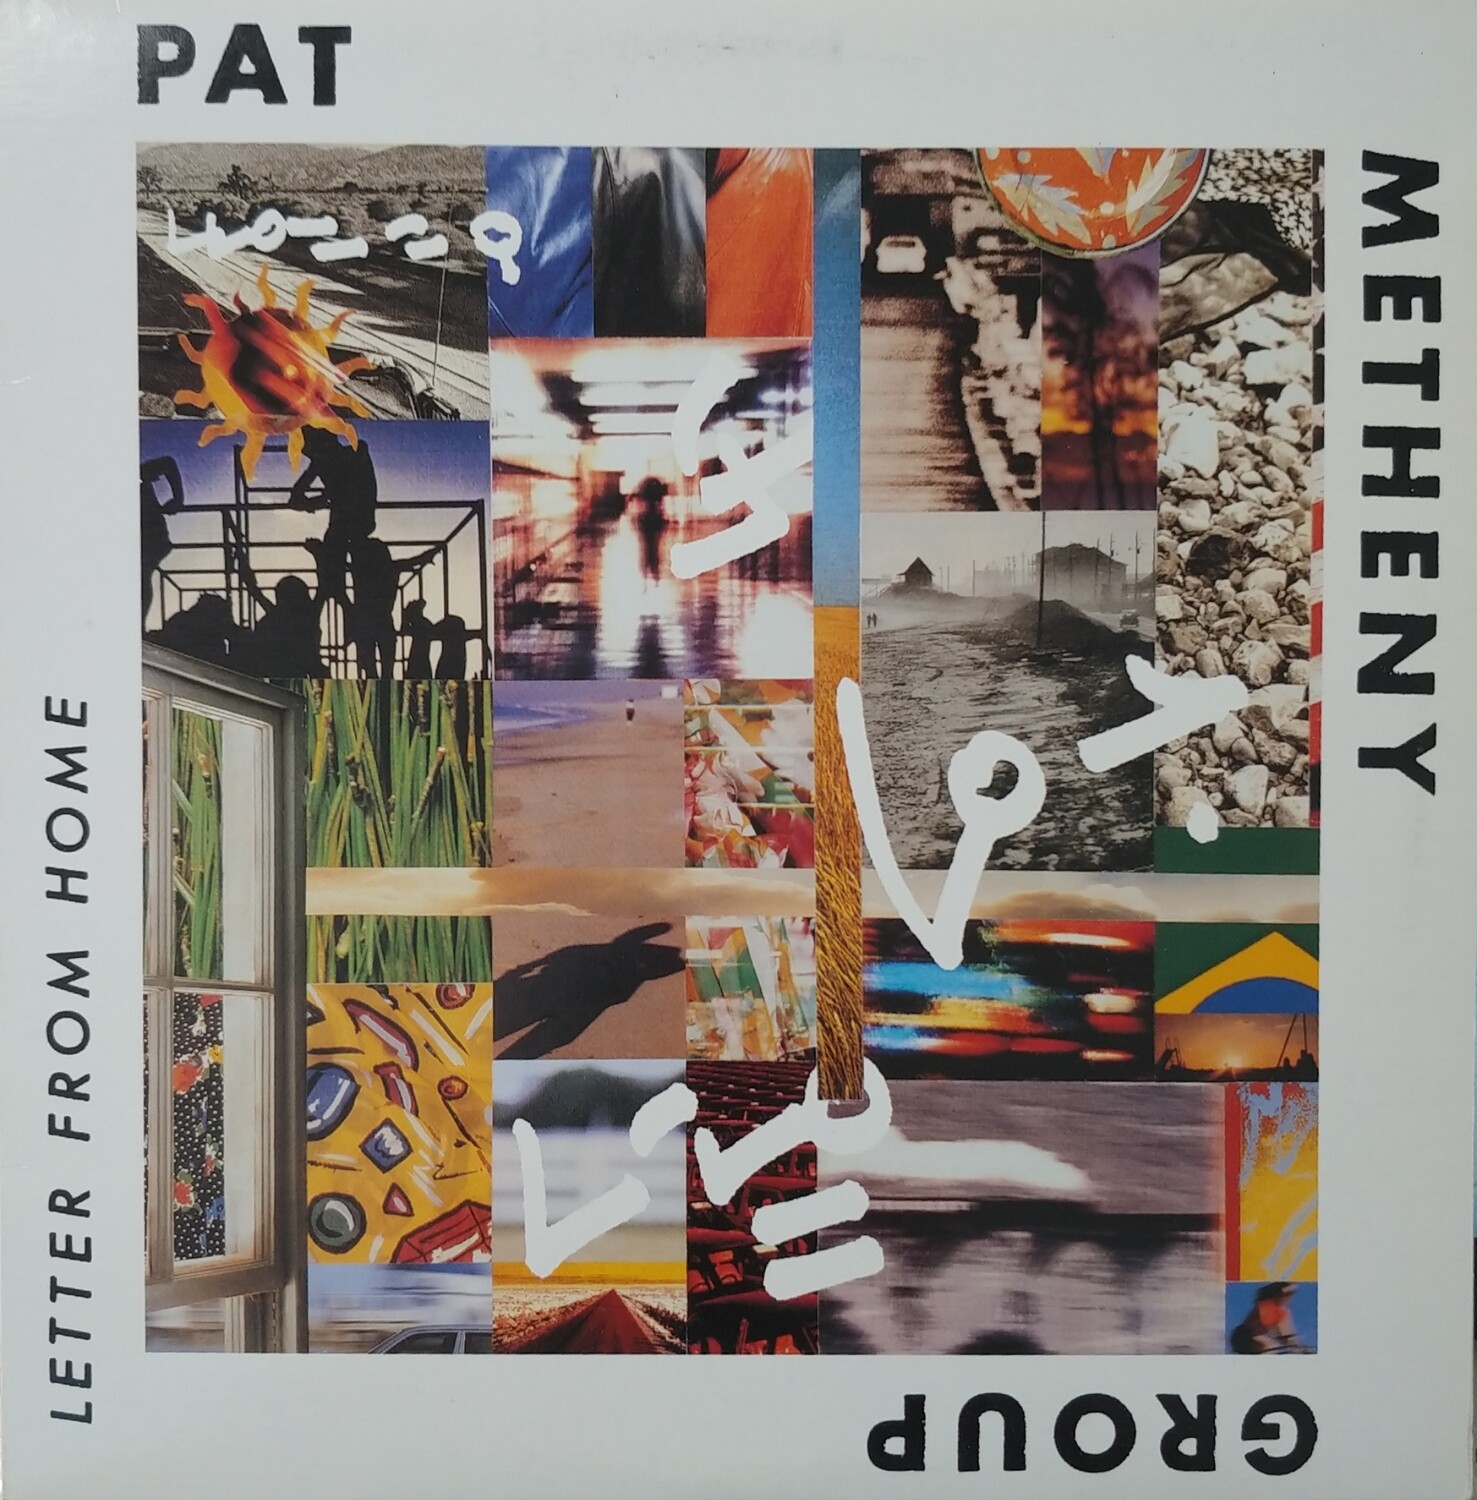 Pat Metheny Group - Letter from home